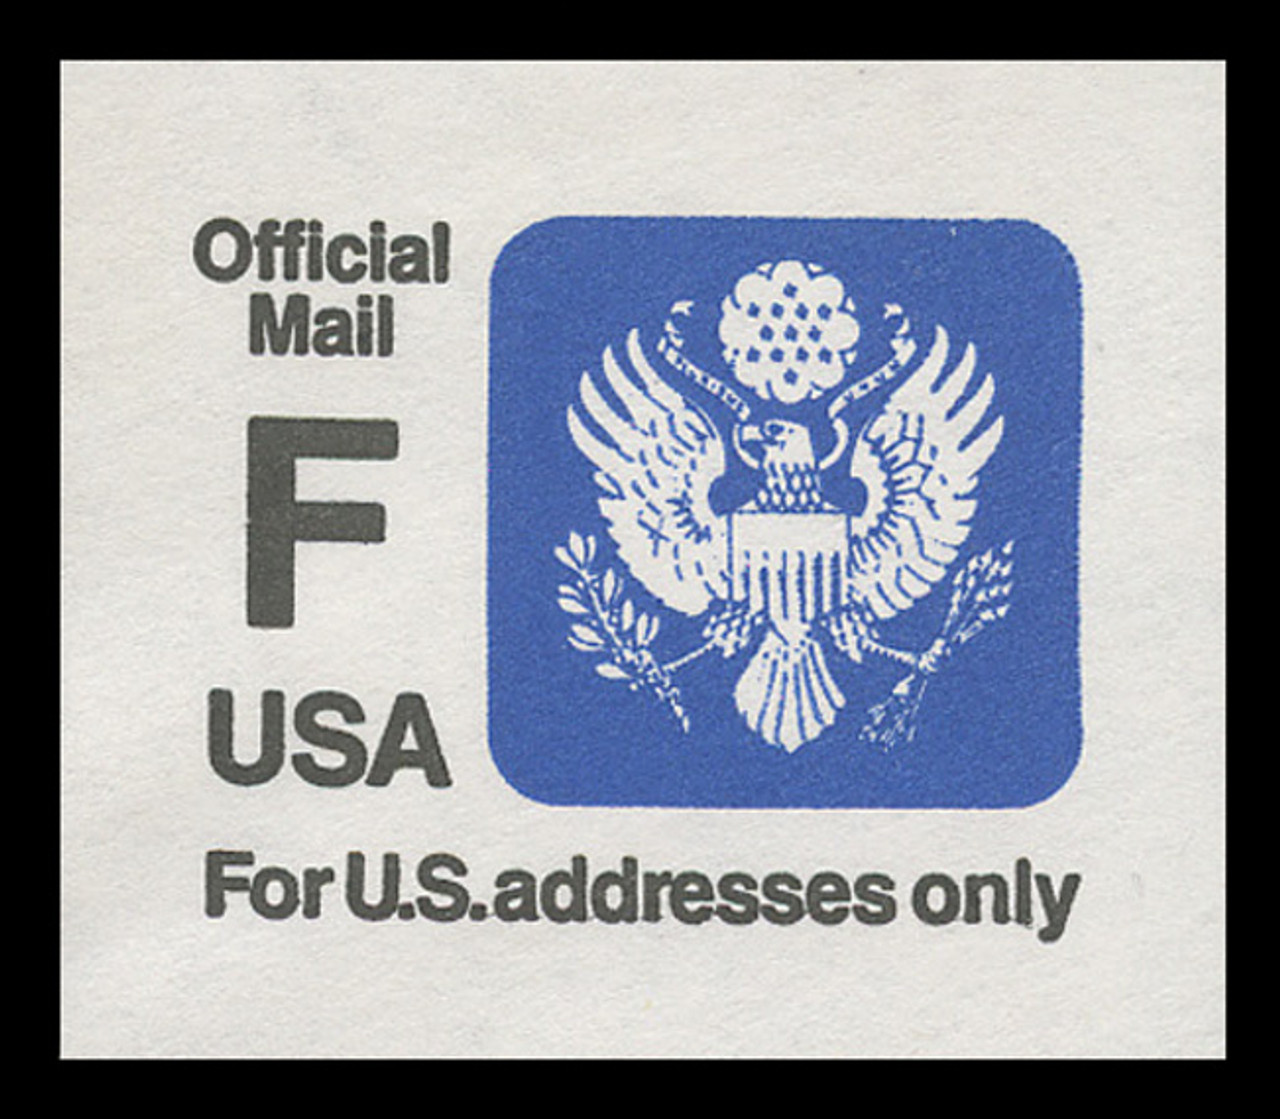 USA Scott # UO  83 1991 (29c) Official Mail, "F" Rate - Mint Cut Square